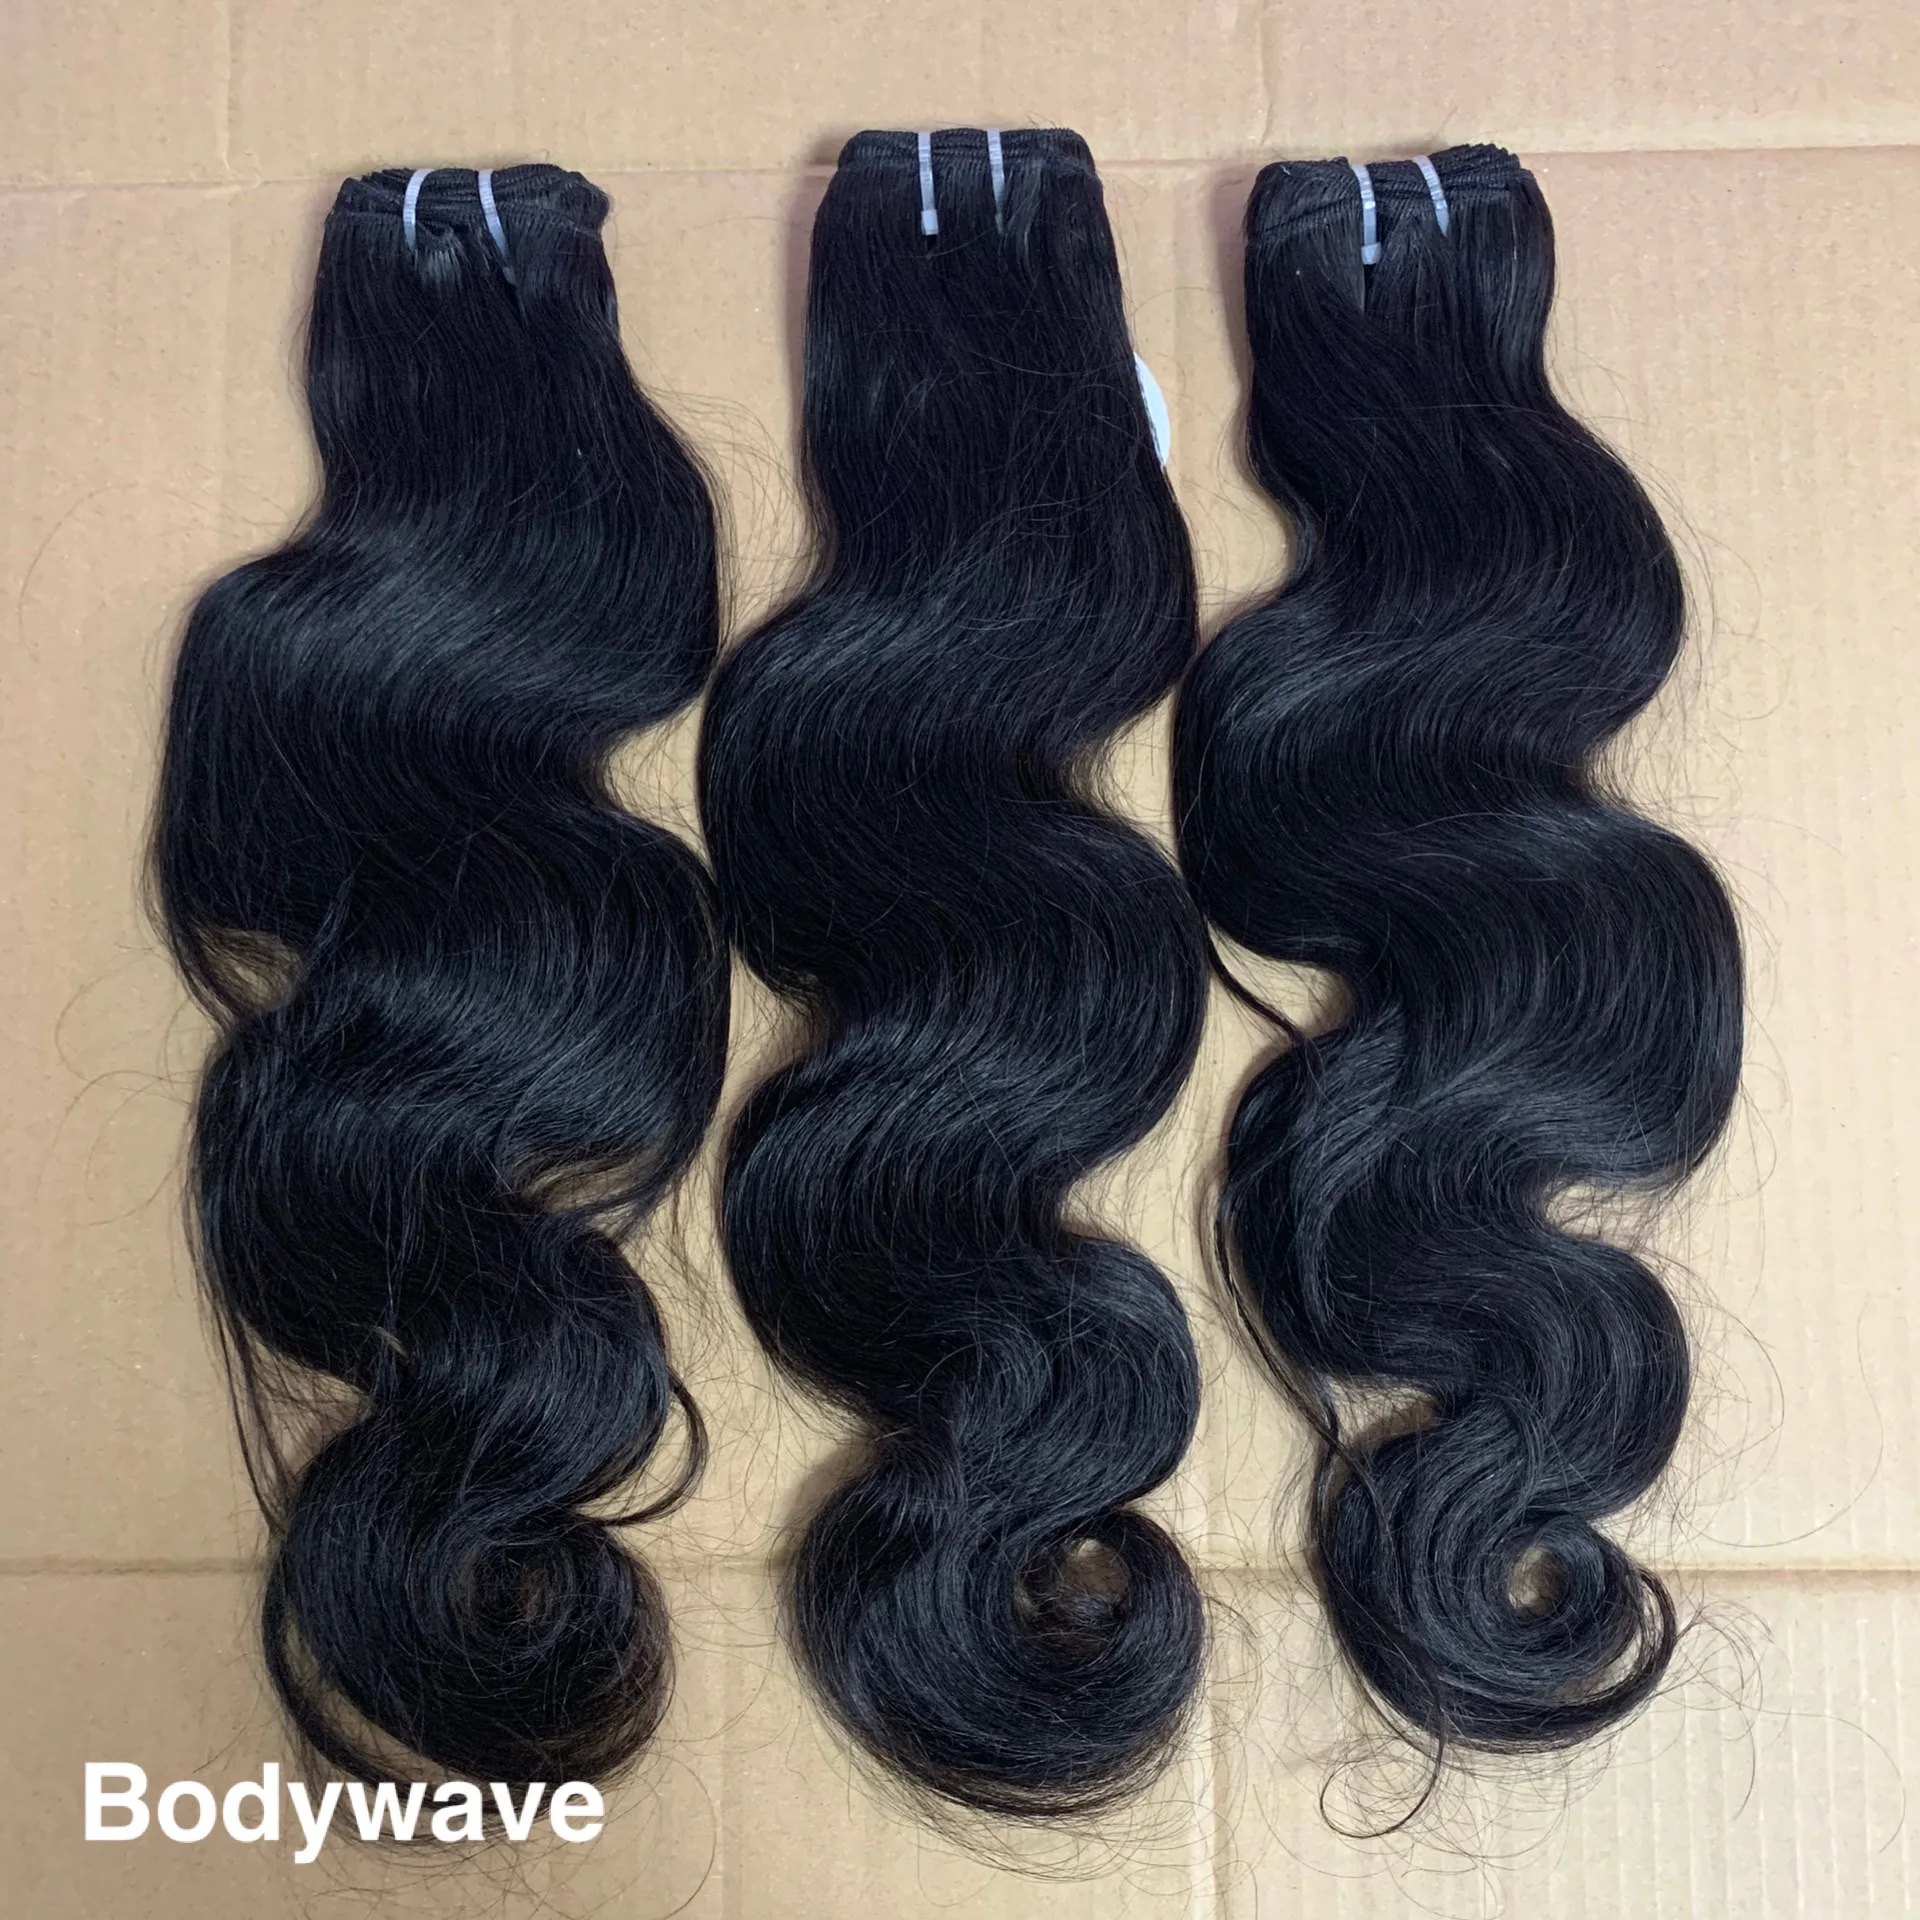 Wholesale raw indian hair double drawn human bundles unprocessed cuticle aligned raw virgin indian hair vendor from india, Customized color